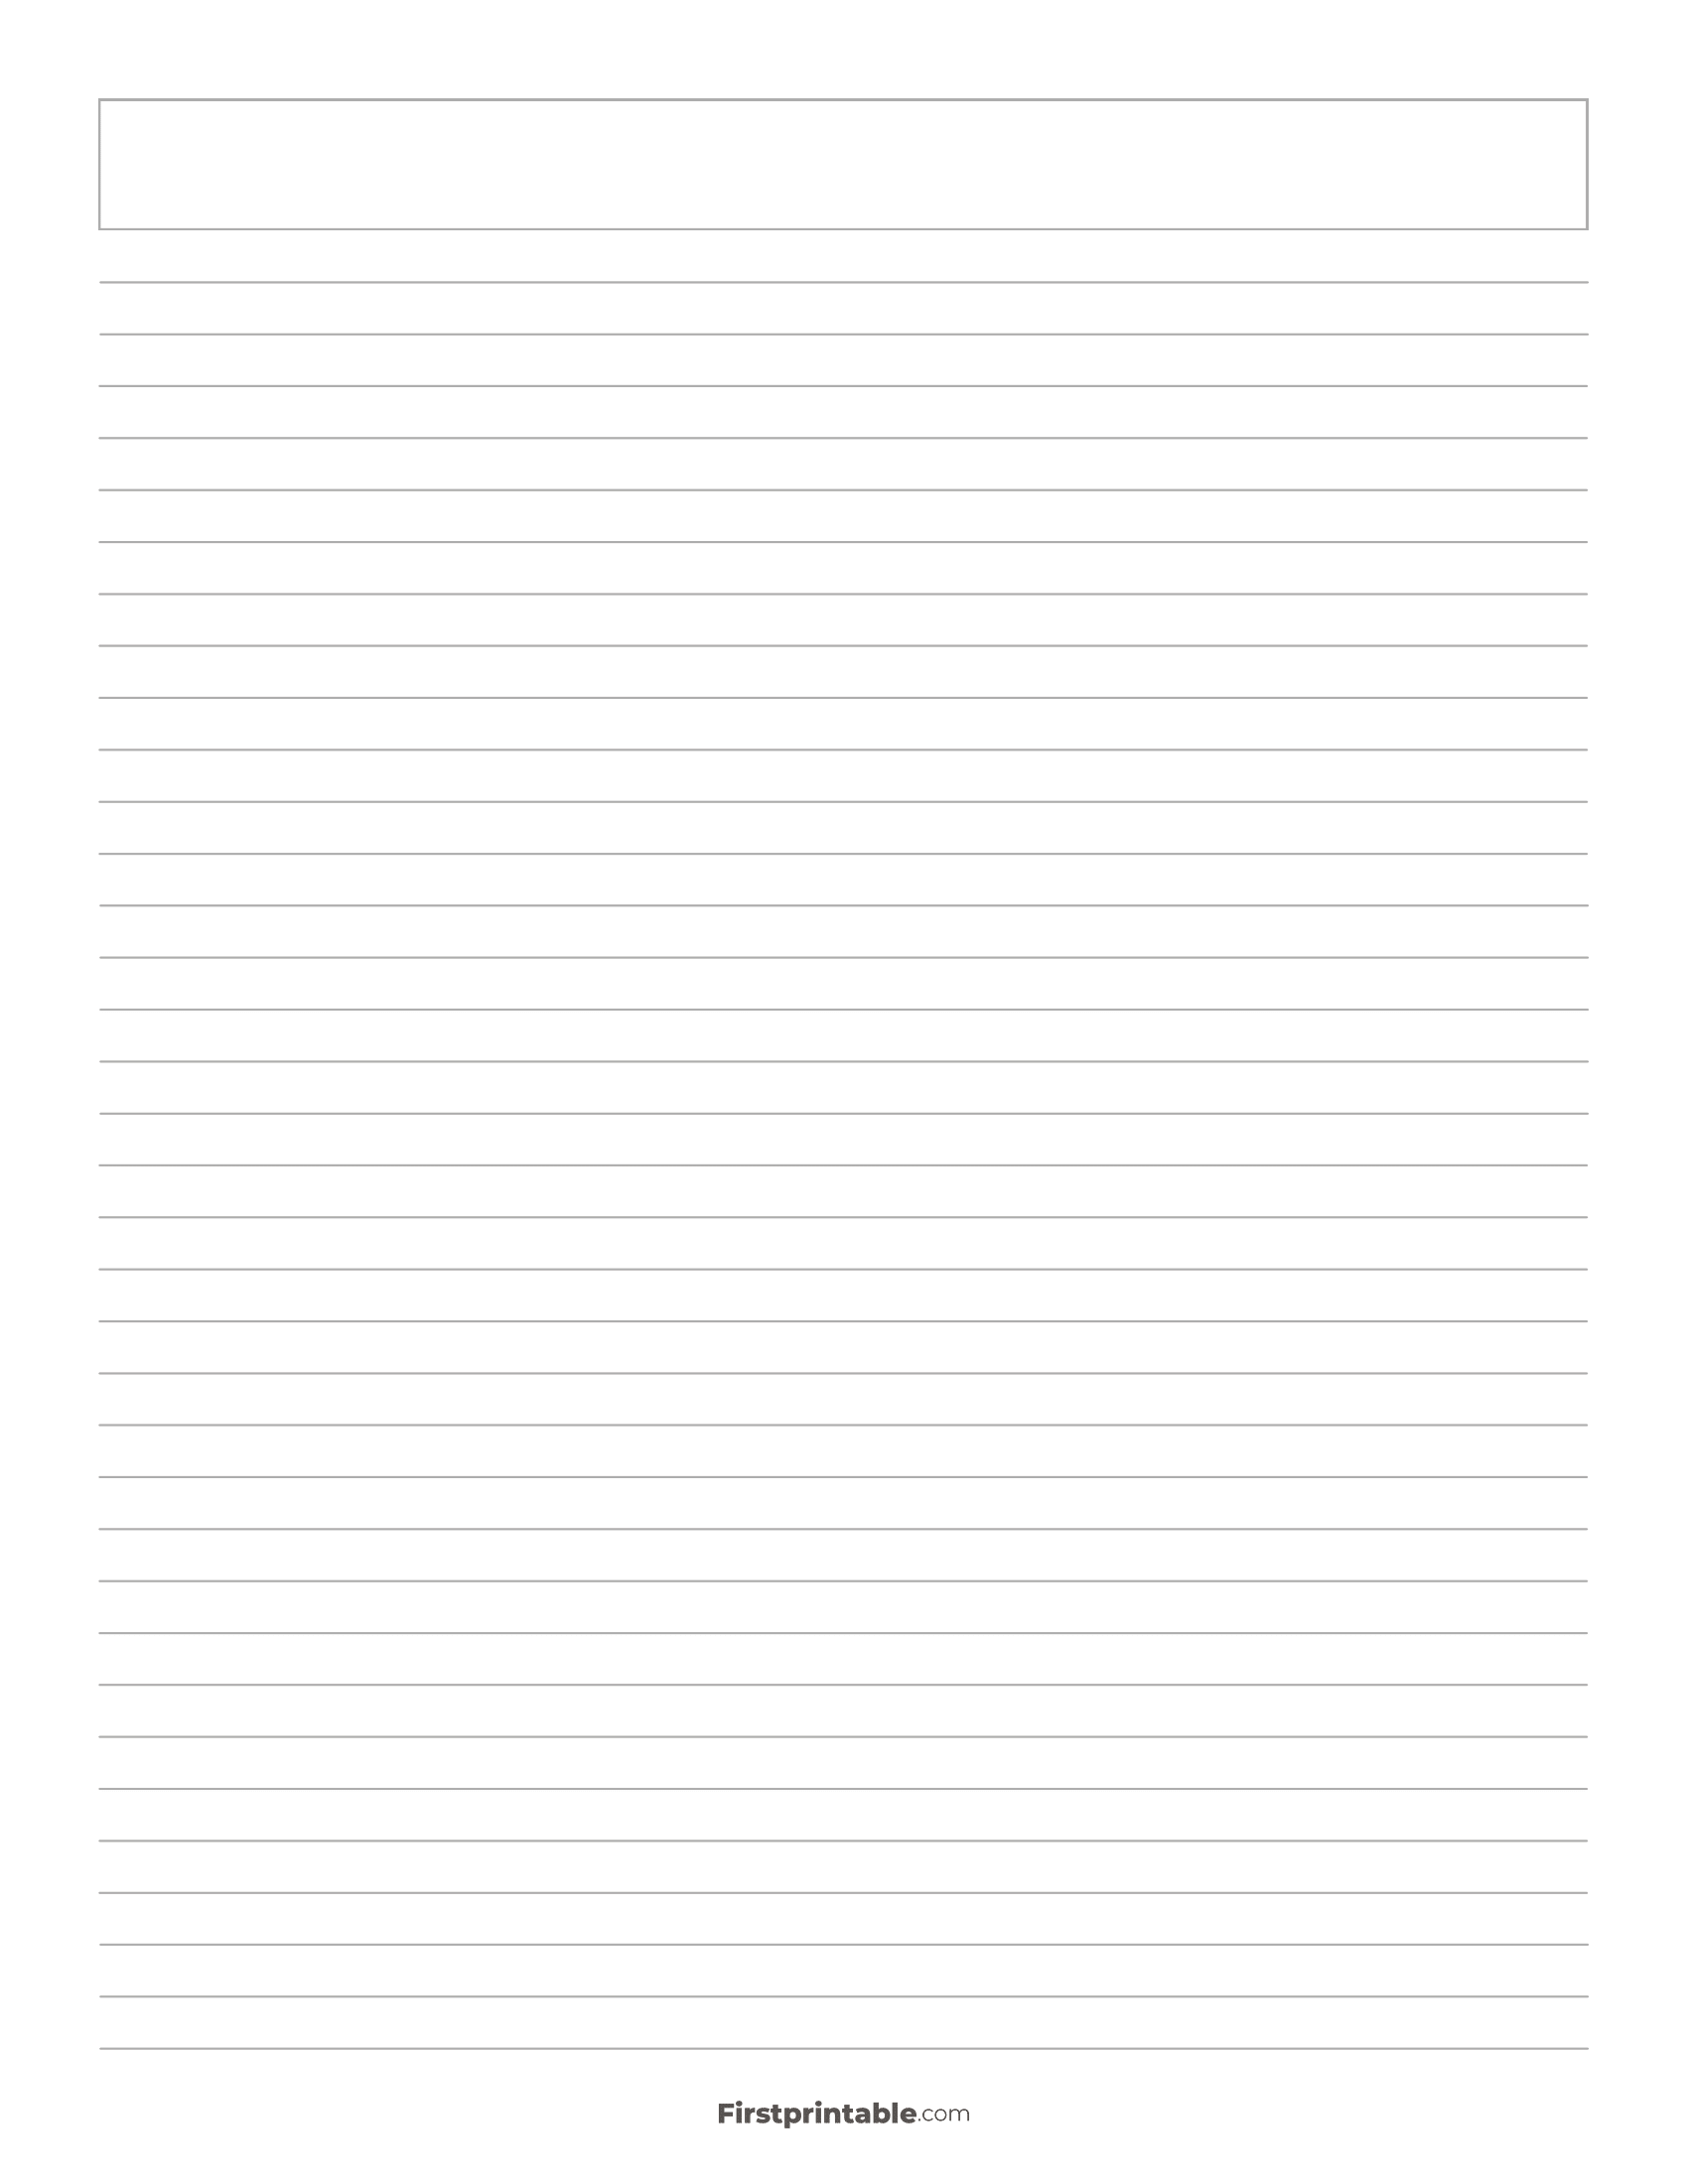 Printable Lined Paper Template - Narrow Ruled with Title